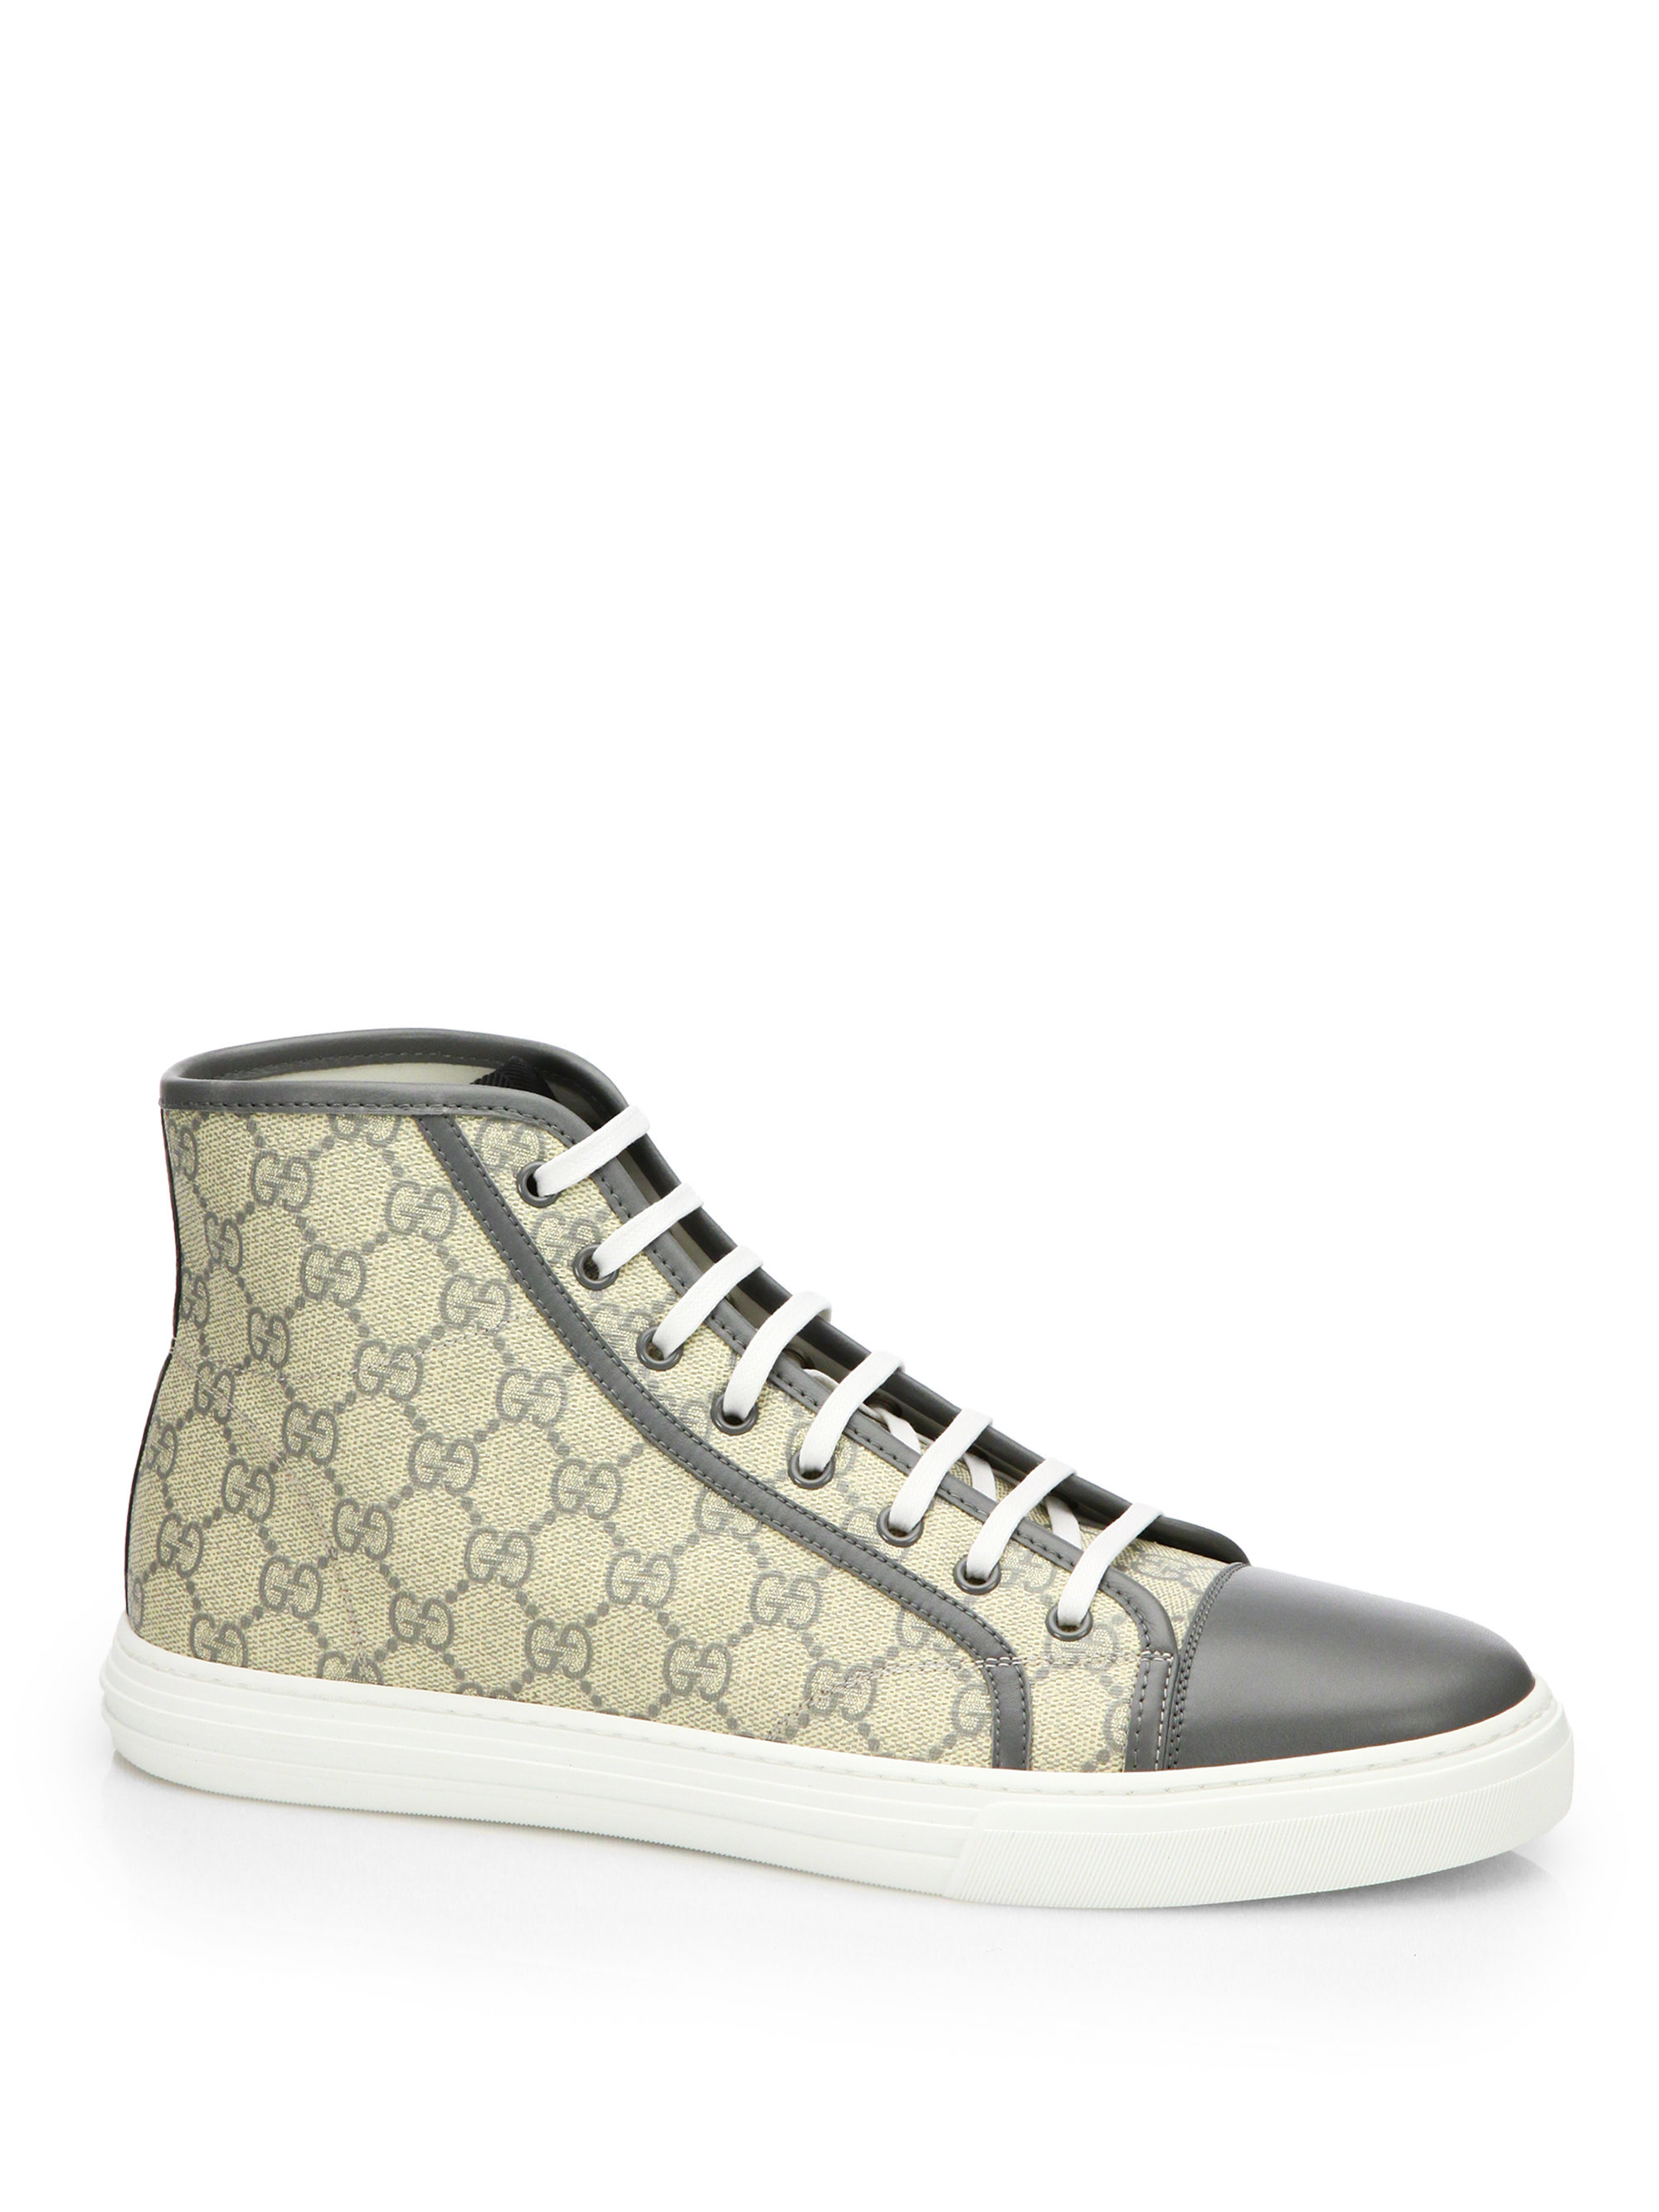 Gucci Gg Supreme Canvas & Leather High-Top Sneakers in Beige for Men ...